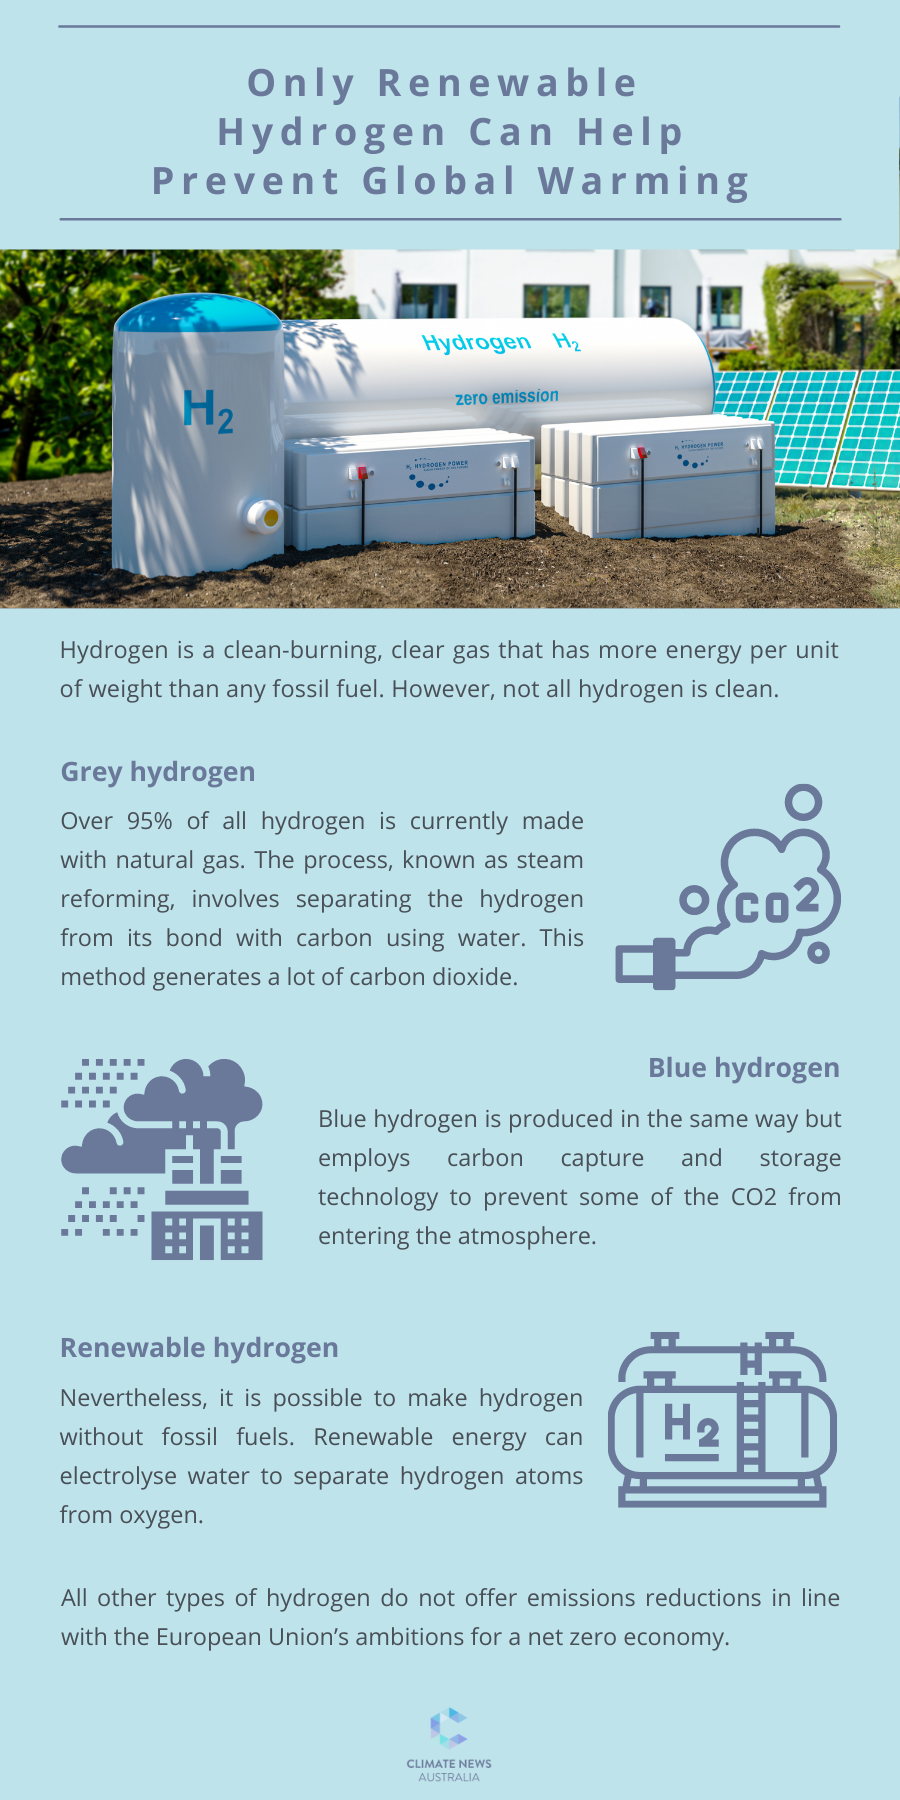 Only Renewable Hydrogen Can Help Prevent Global Warming